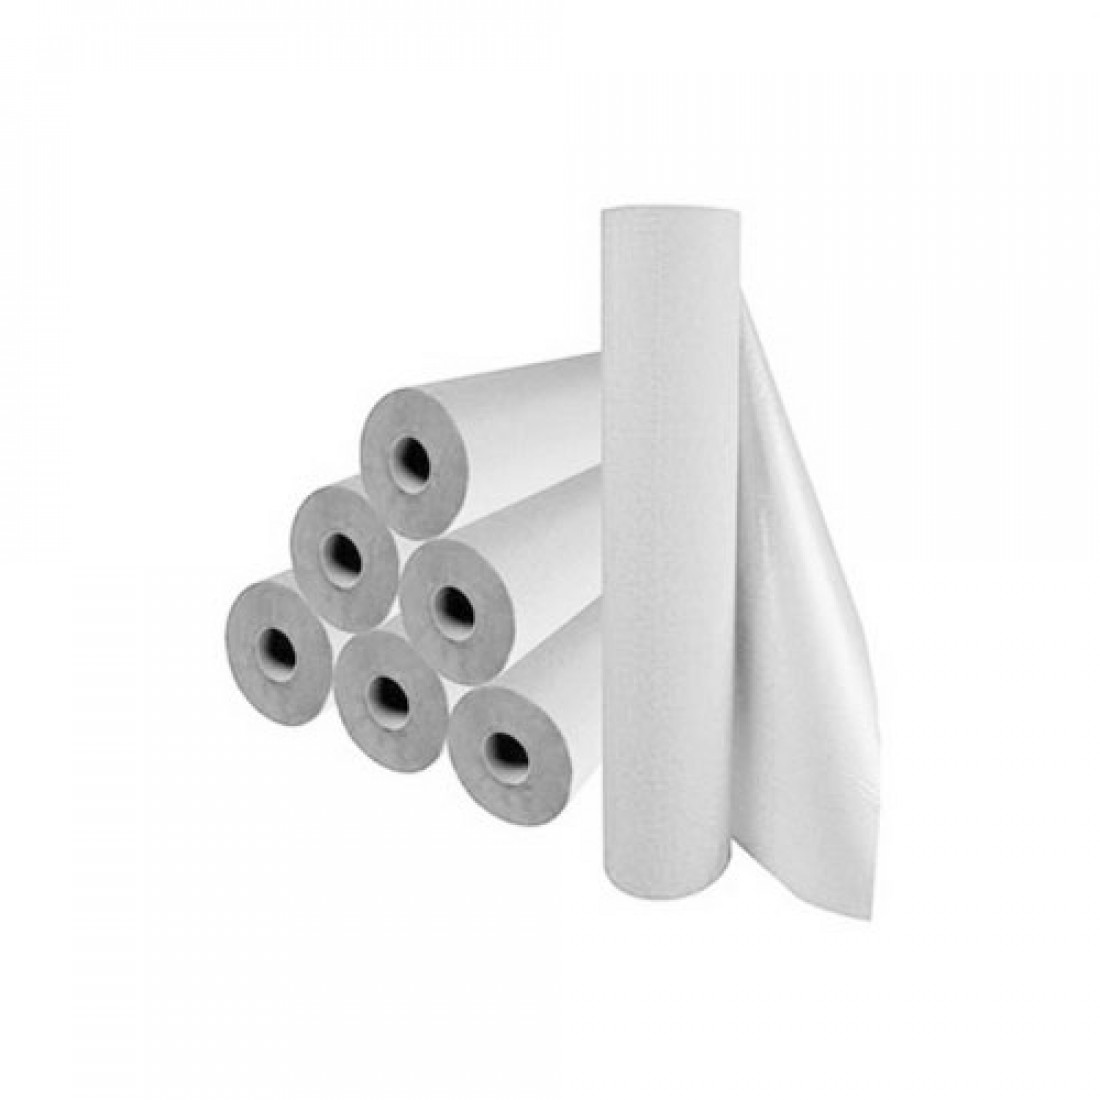 Bed roll paper 58x50cm-3710135 SINGLE USE PRODUCTS